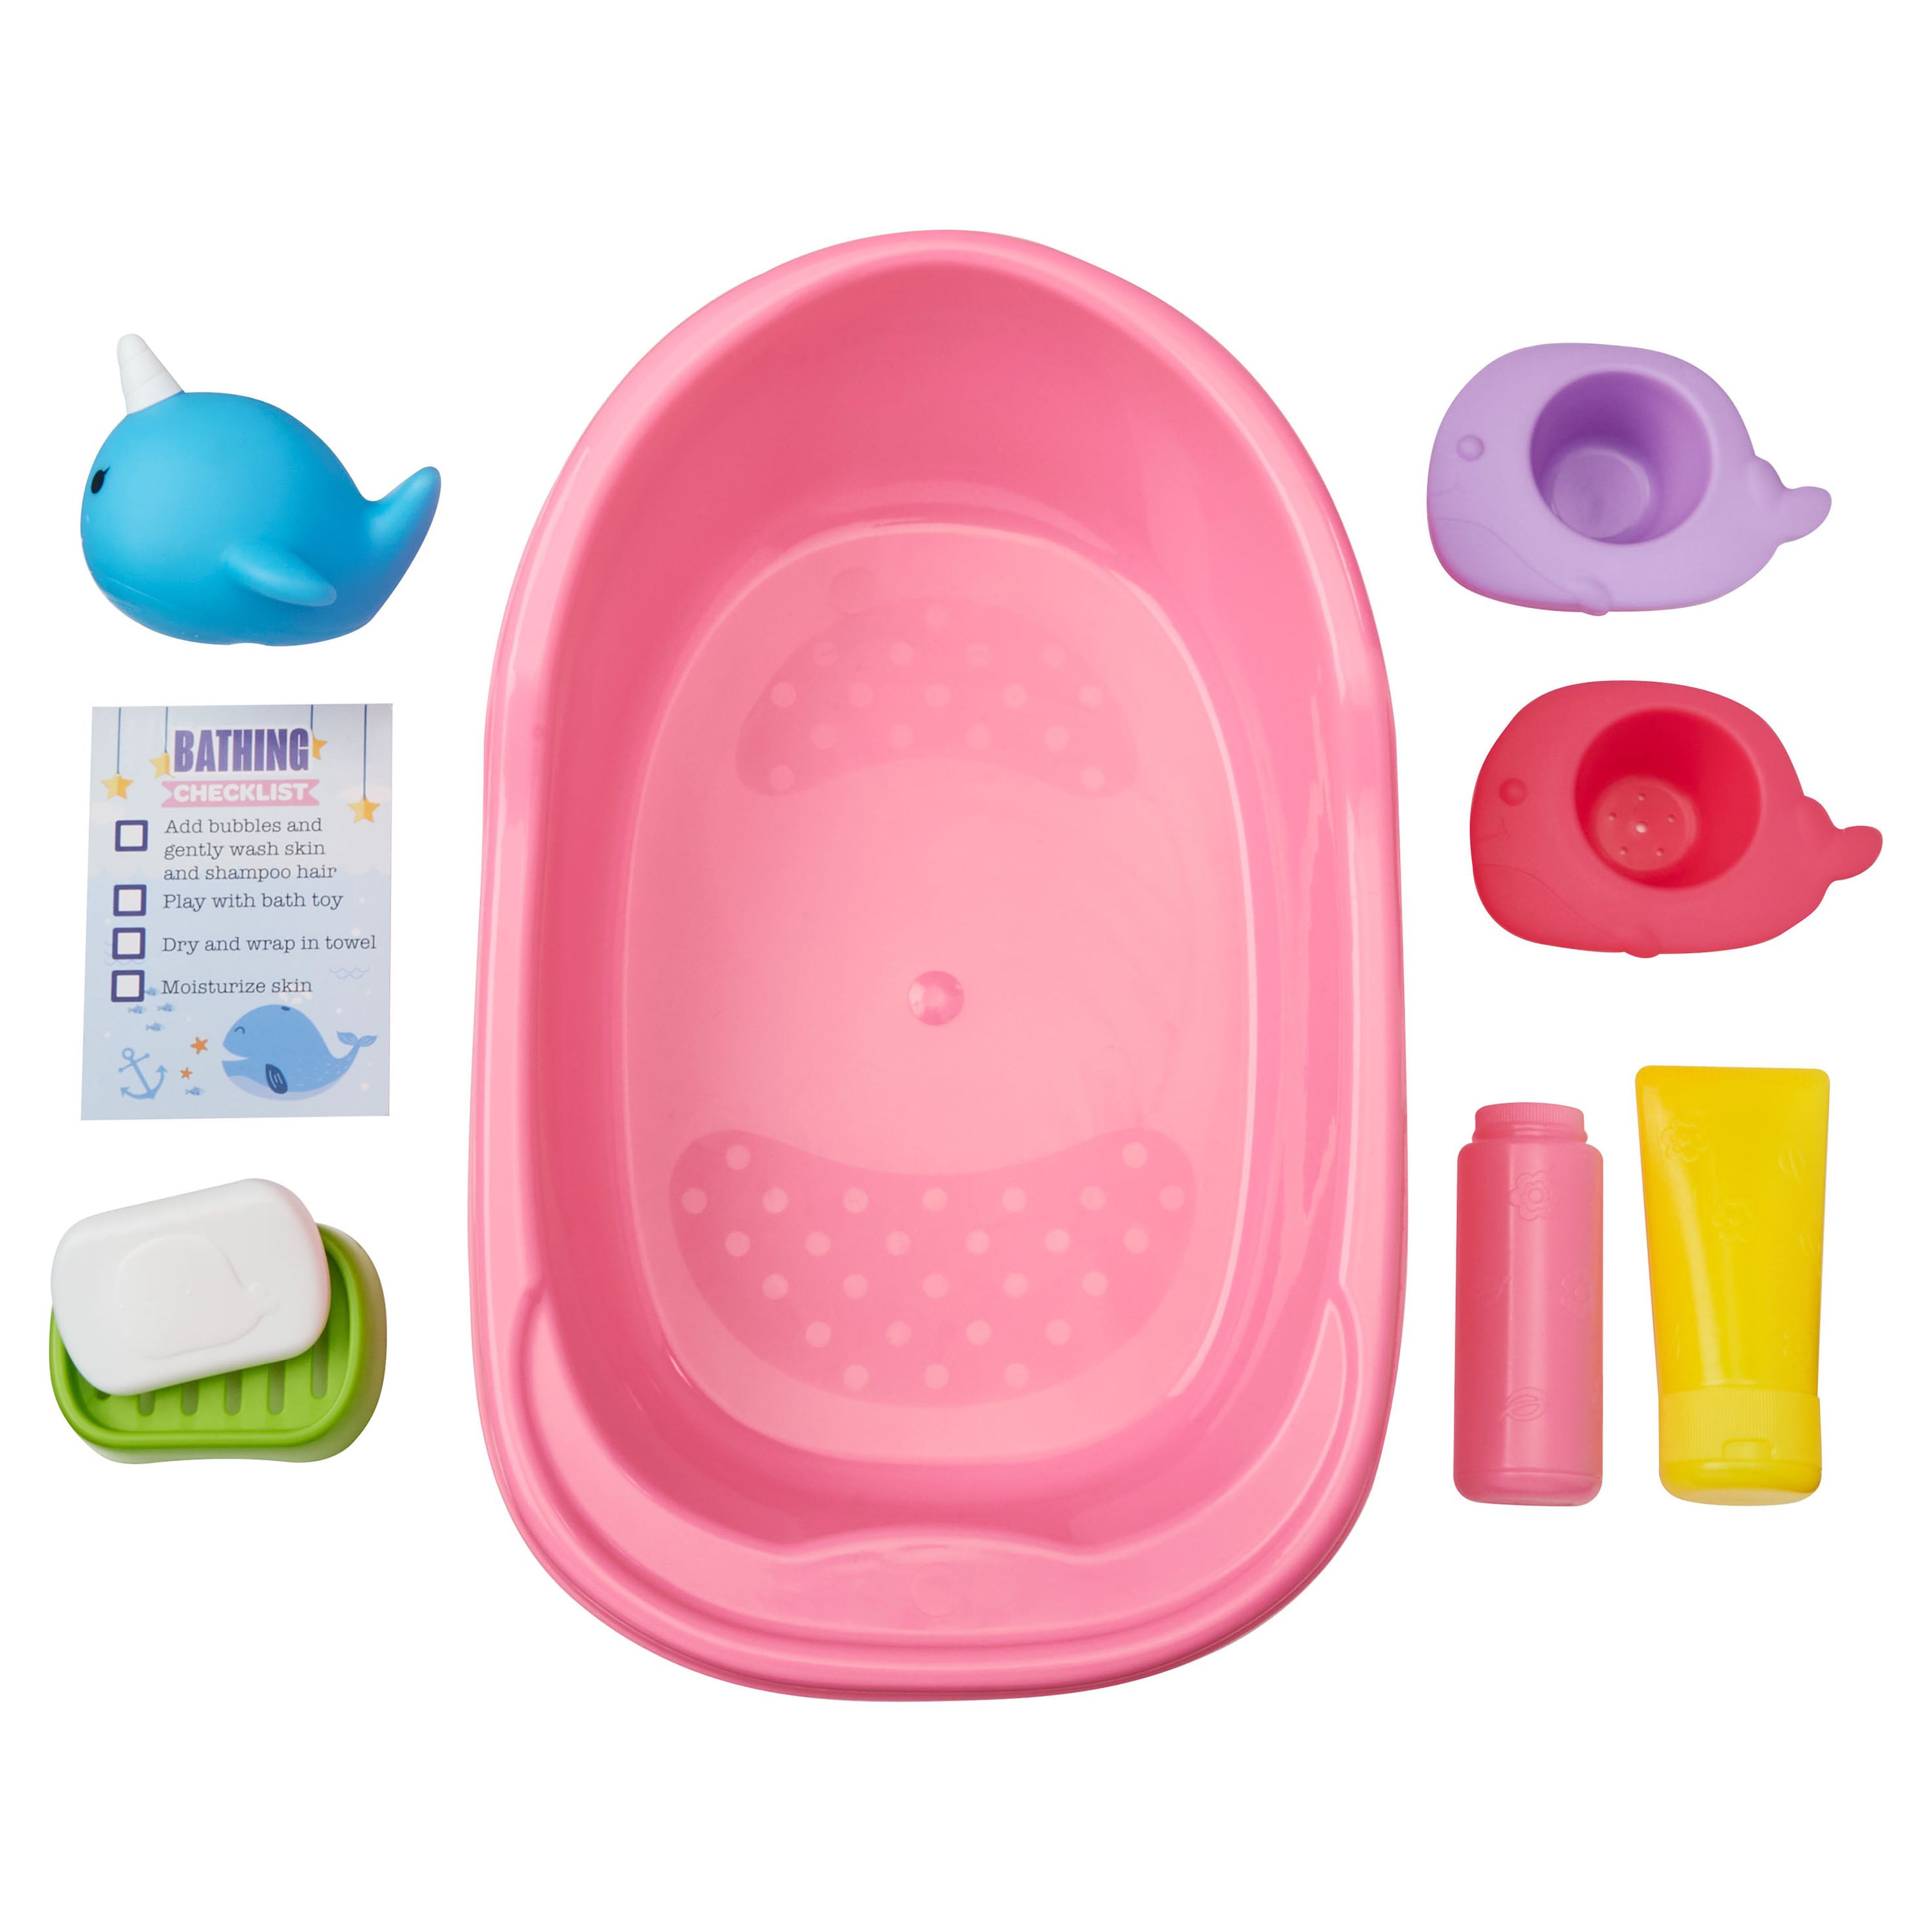 Kid Connection Bathing Baby Doll Play Set, Light Skin Tone - image 4 of 5